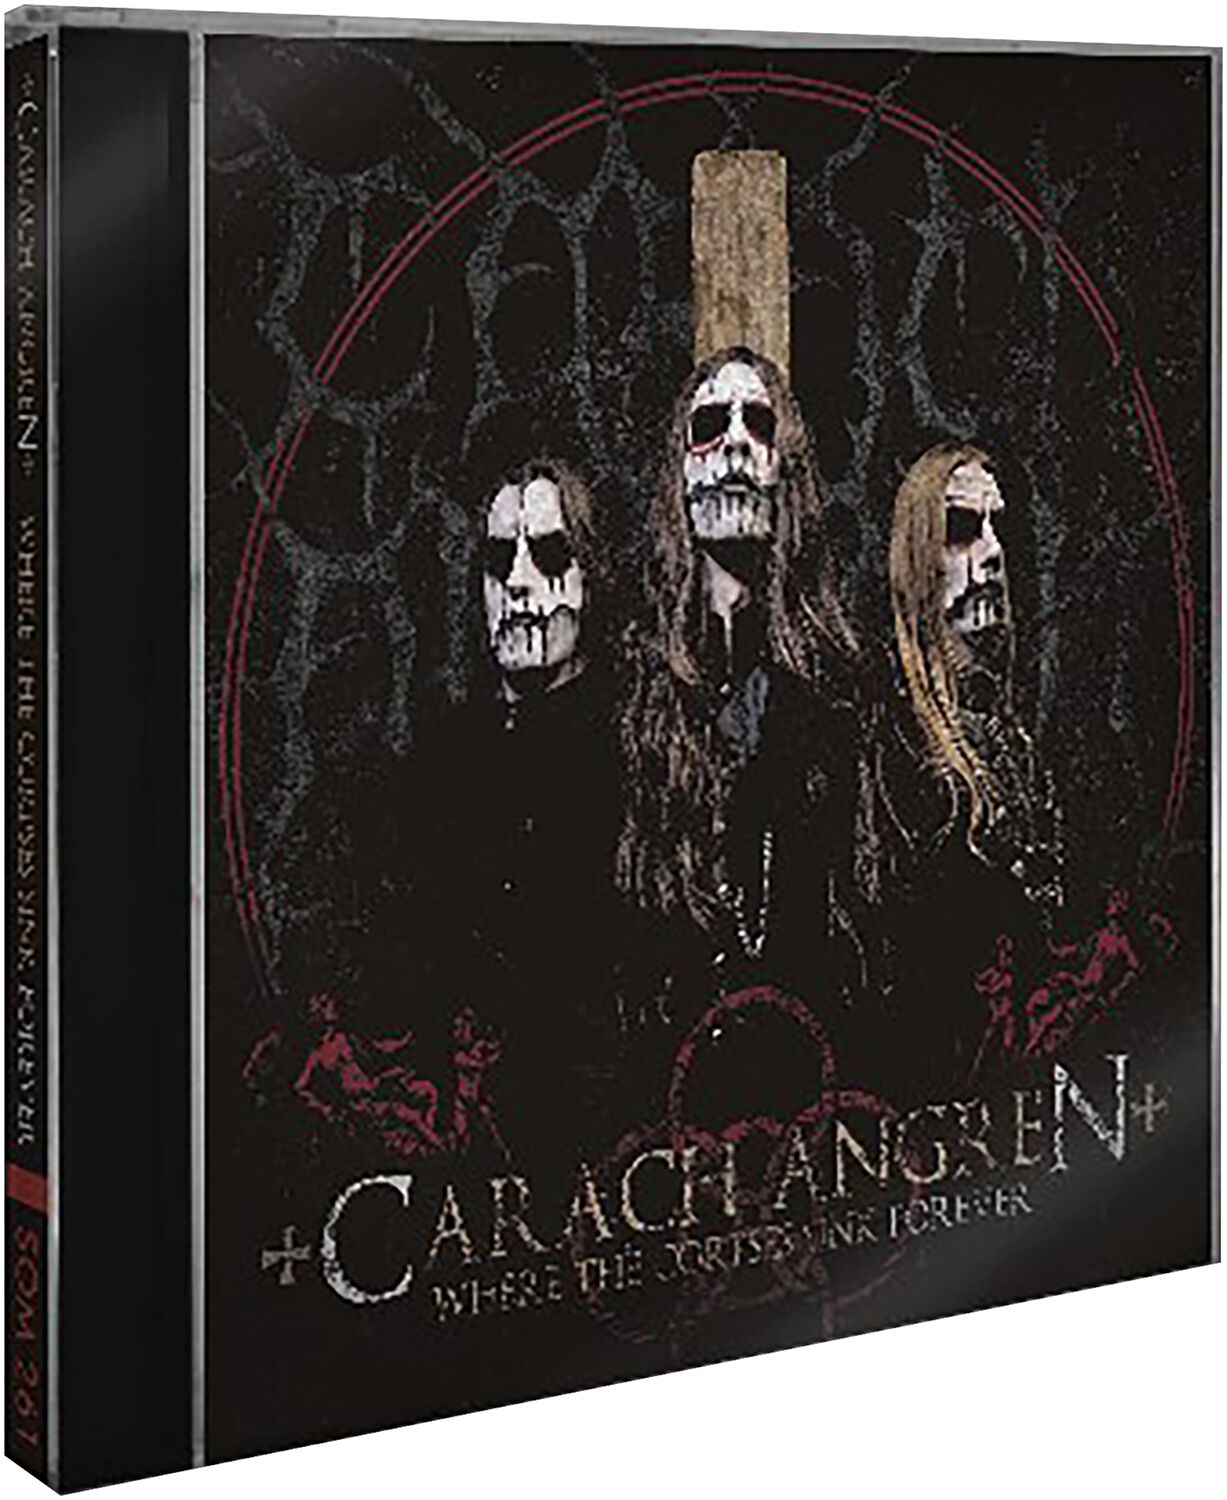 Image of Carach Angren Where the corpses sink forever CD Standard